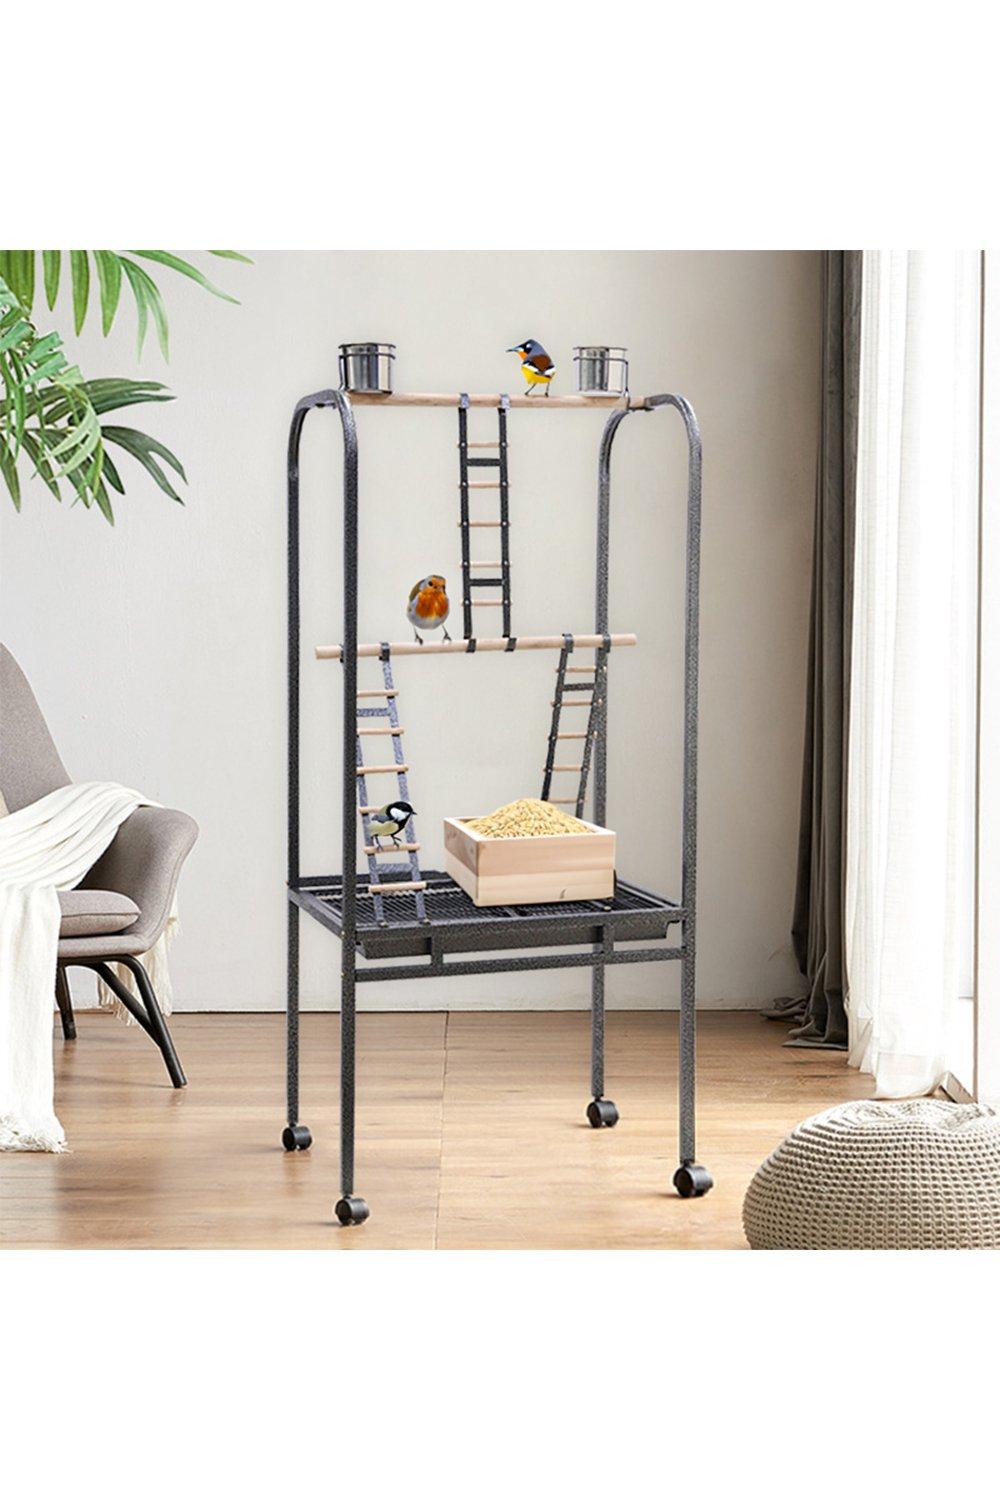 140cm Metal Frame Bird Play Stand with Feeding Bowls and Ladders